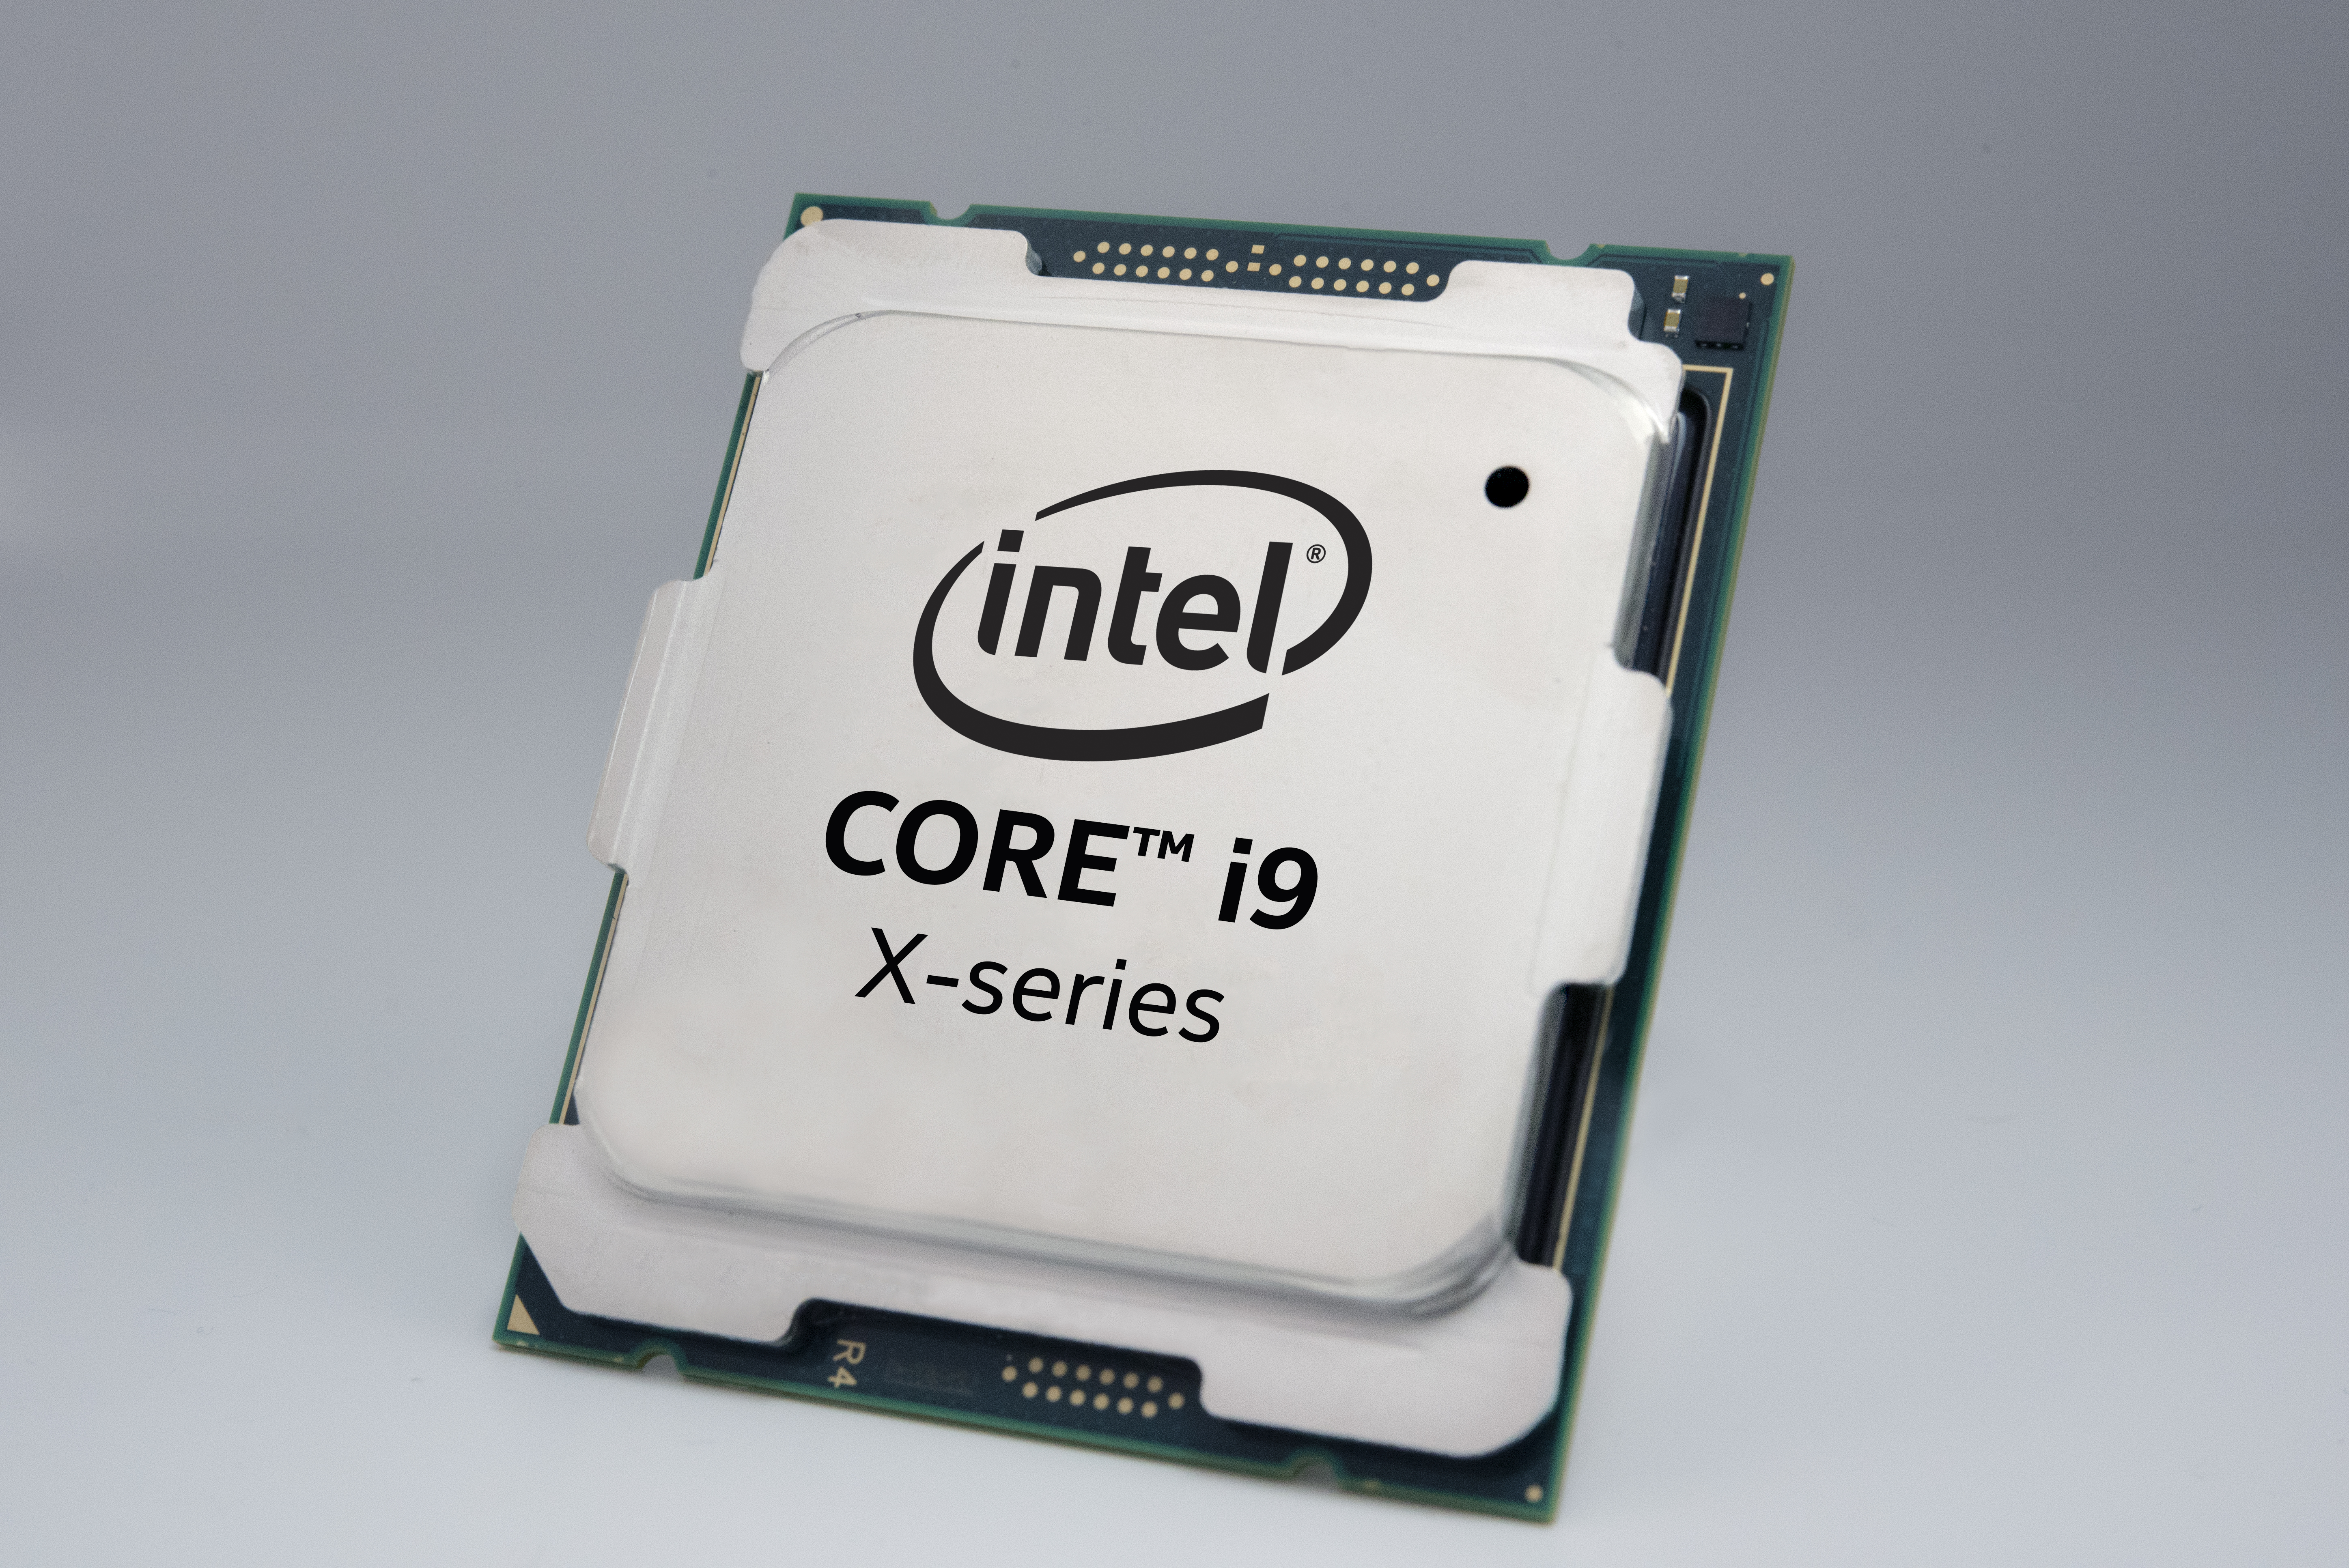 Cascade Lake Effect: A Performance Look At Intel's Core i9-10980XE